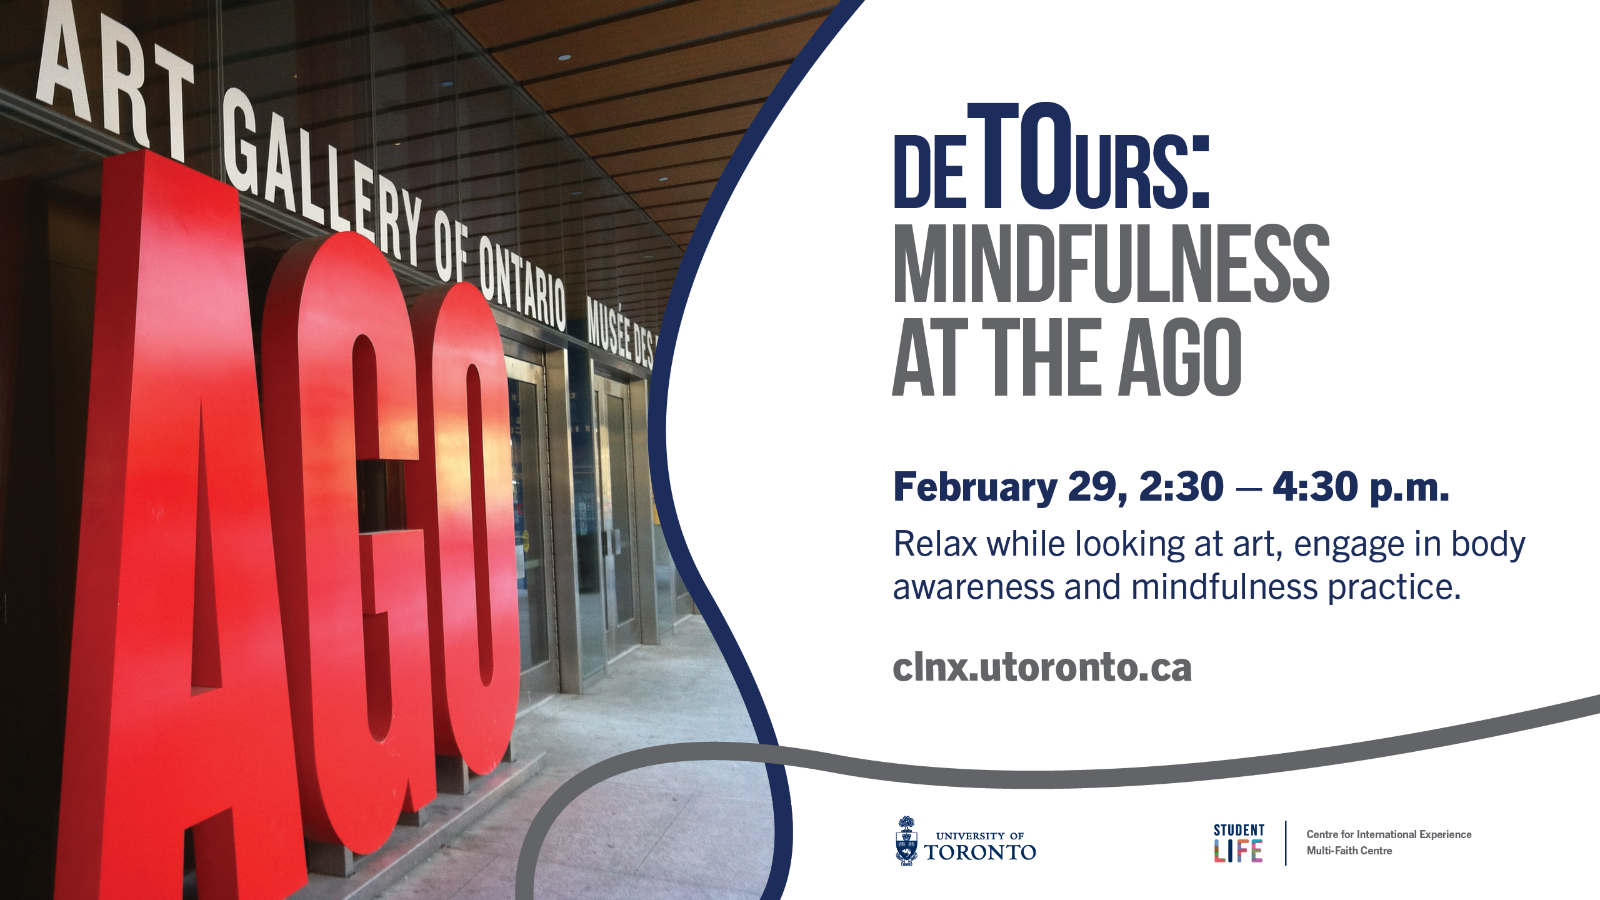 A photo of the Art Gallery of Ontario, with text "deTOurs: Mindfulness at the AGO; February 29, 2:30 - 4:30 PM. Relax while looking at art, engage in body awareness and mindfulness practice. clnx.utoronto.ca" 